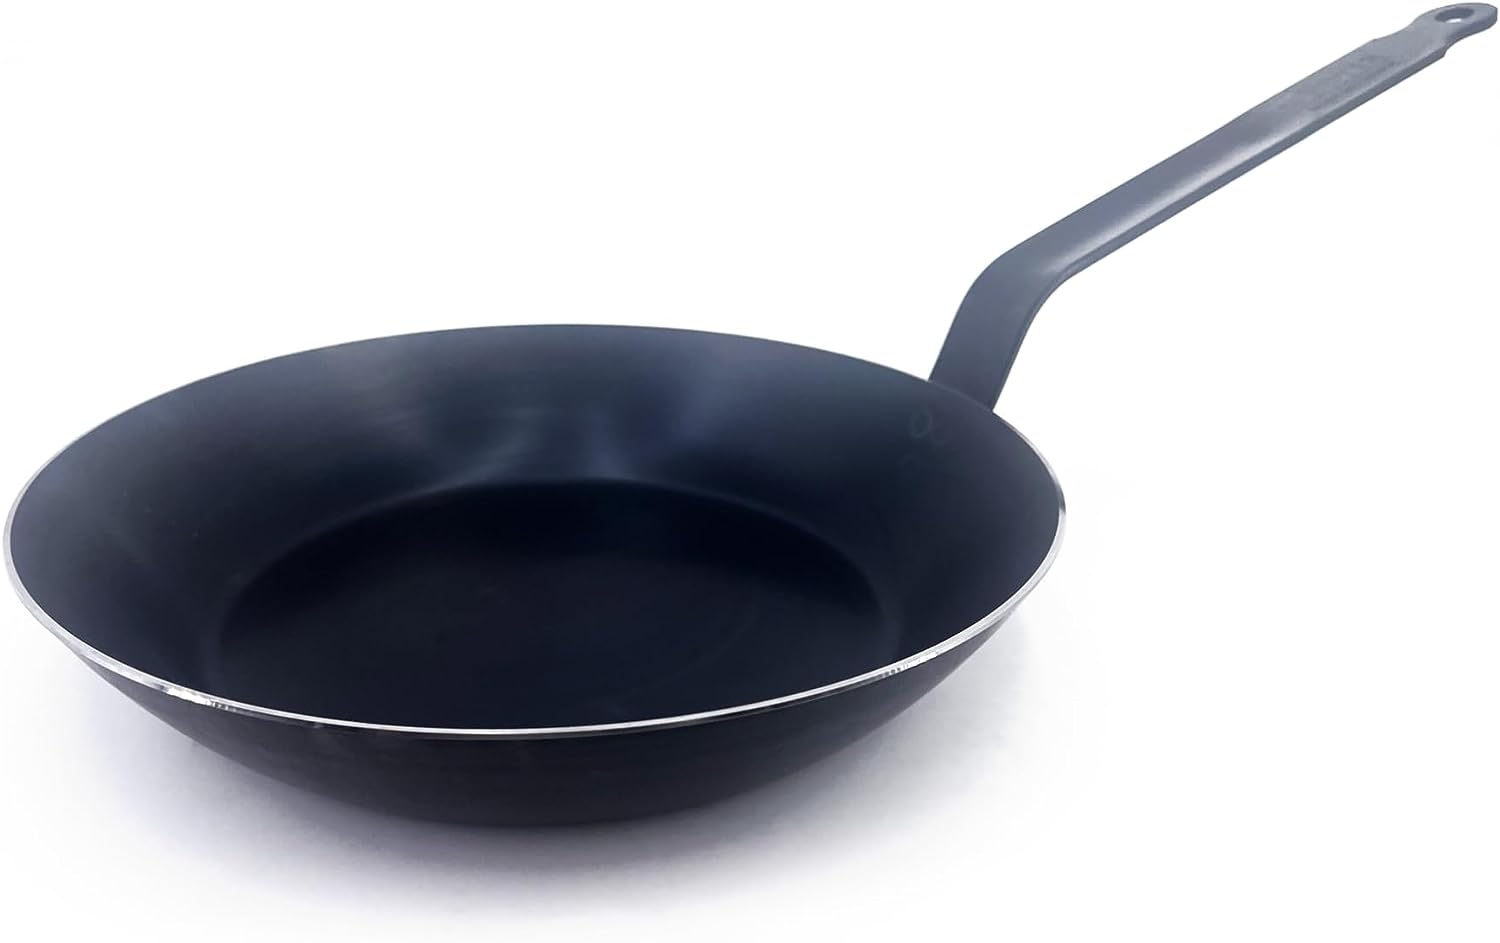 de Buyer - Blue Carbon Steel Fry Pan 2mm Thick - ACCESS - 8” Diameter, 5.5” Cooking Surface - Oven Safe - Naturally Nonstick - Non-Toxic Coating - Made in France